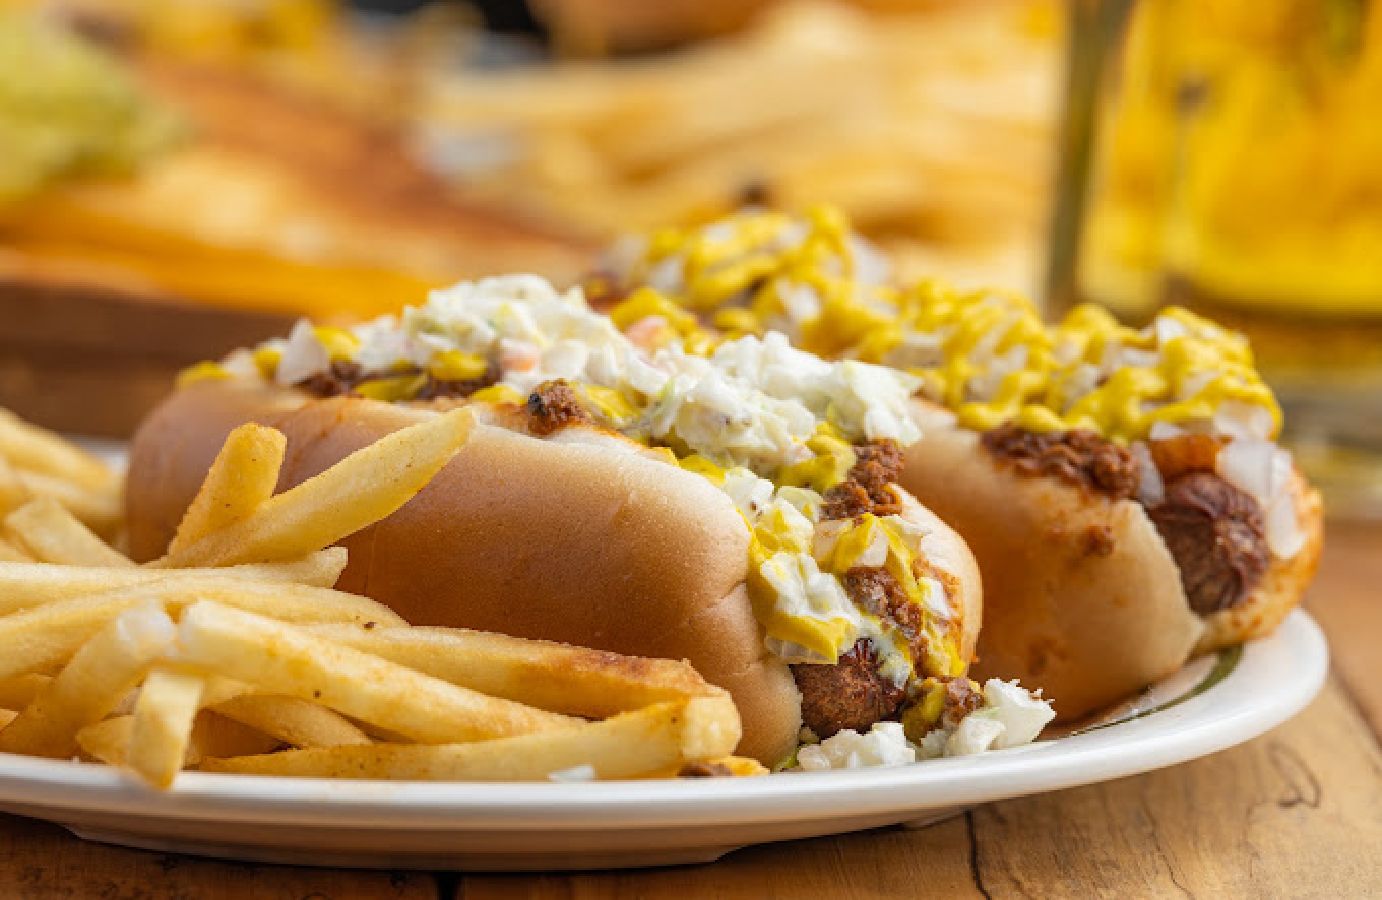 Chili & slaw dogs on a plate side view